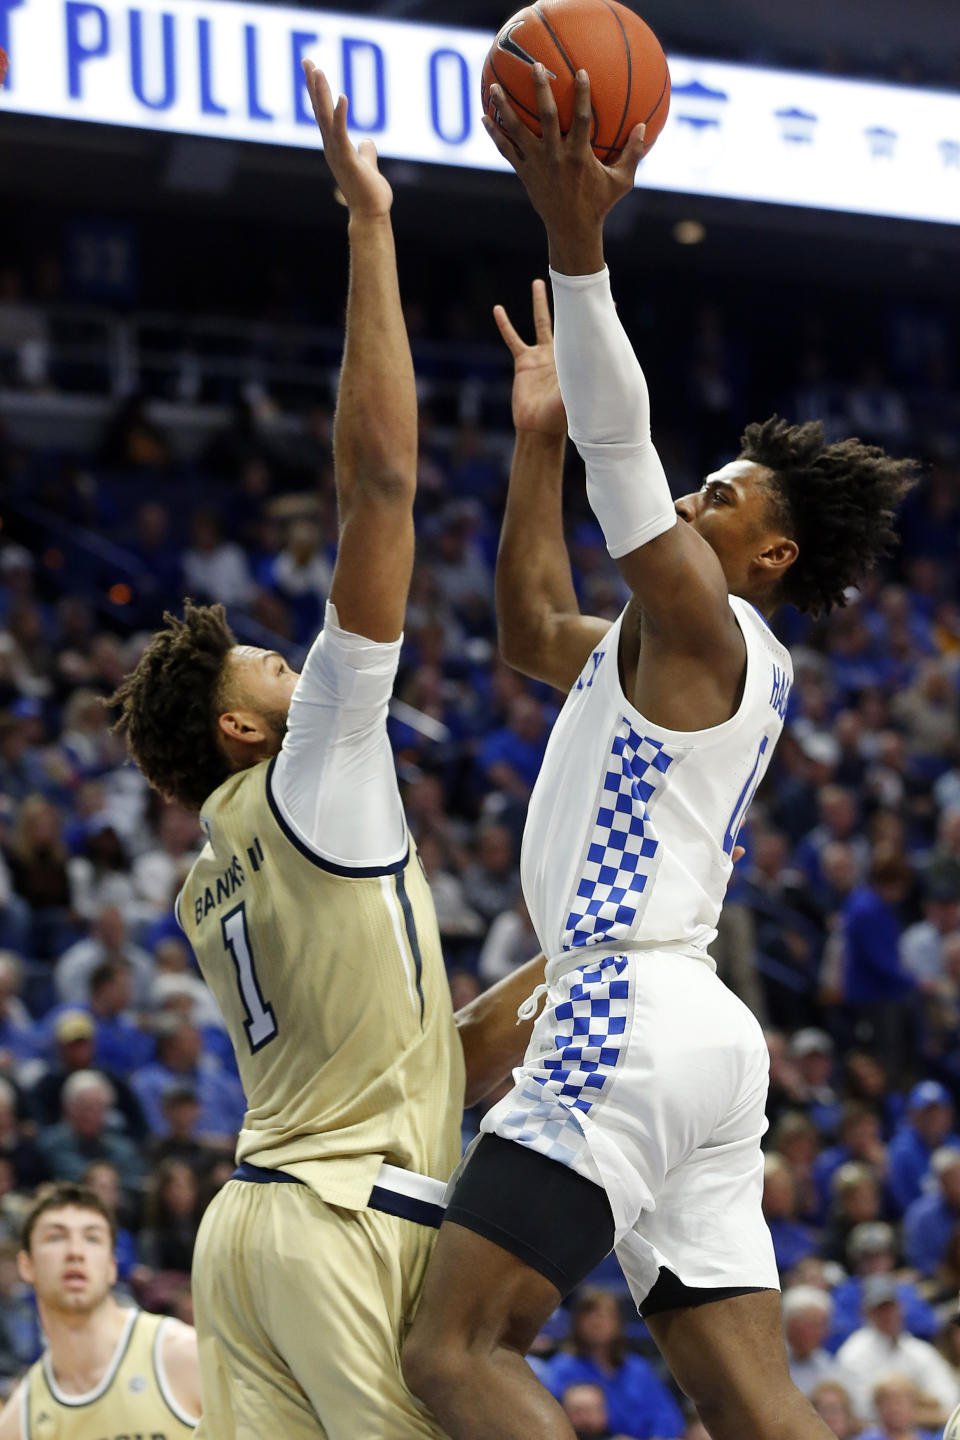 Kentucky's Ashton Hagans, right, shoots while pressured by Georgia Tech's James Banks III, left, during the first half of an NCAA college basketball game in Lexington, Ky., Saturday, Dec. 14, 2019. (AP Photo/James Crisp)